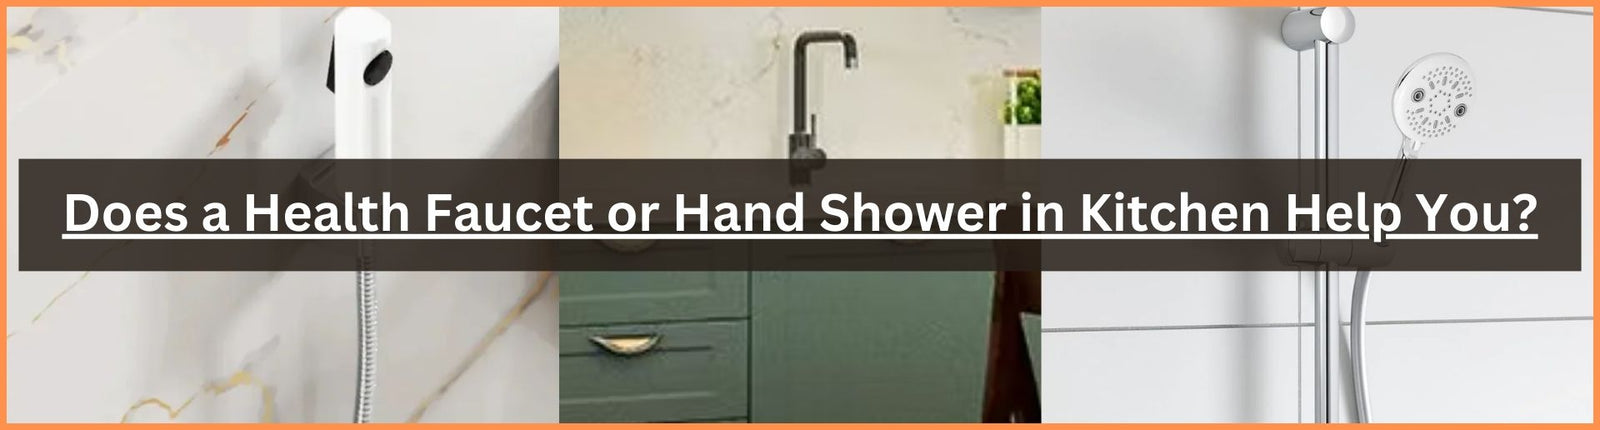 Does a Health Faucet or Hand Shower in Kitchen Help You